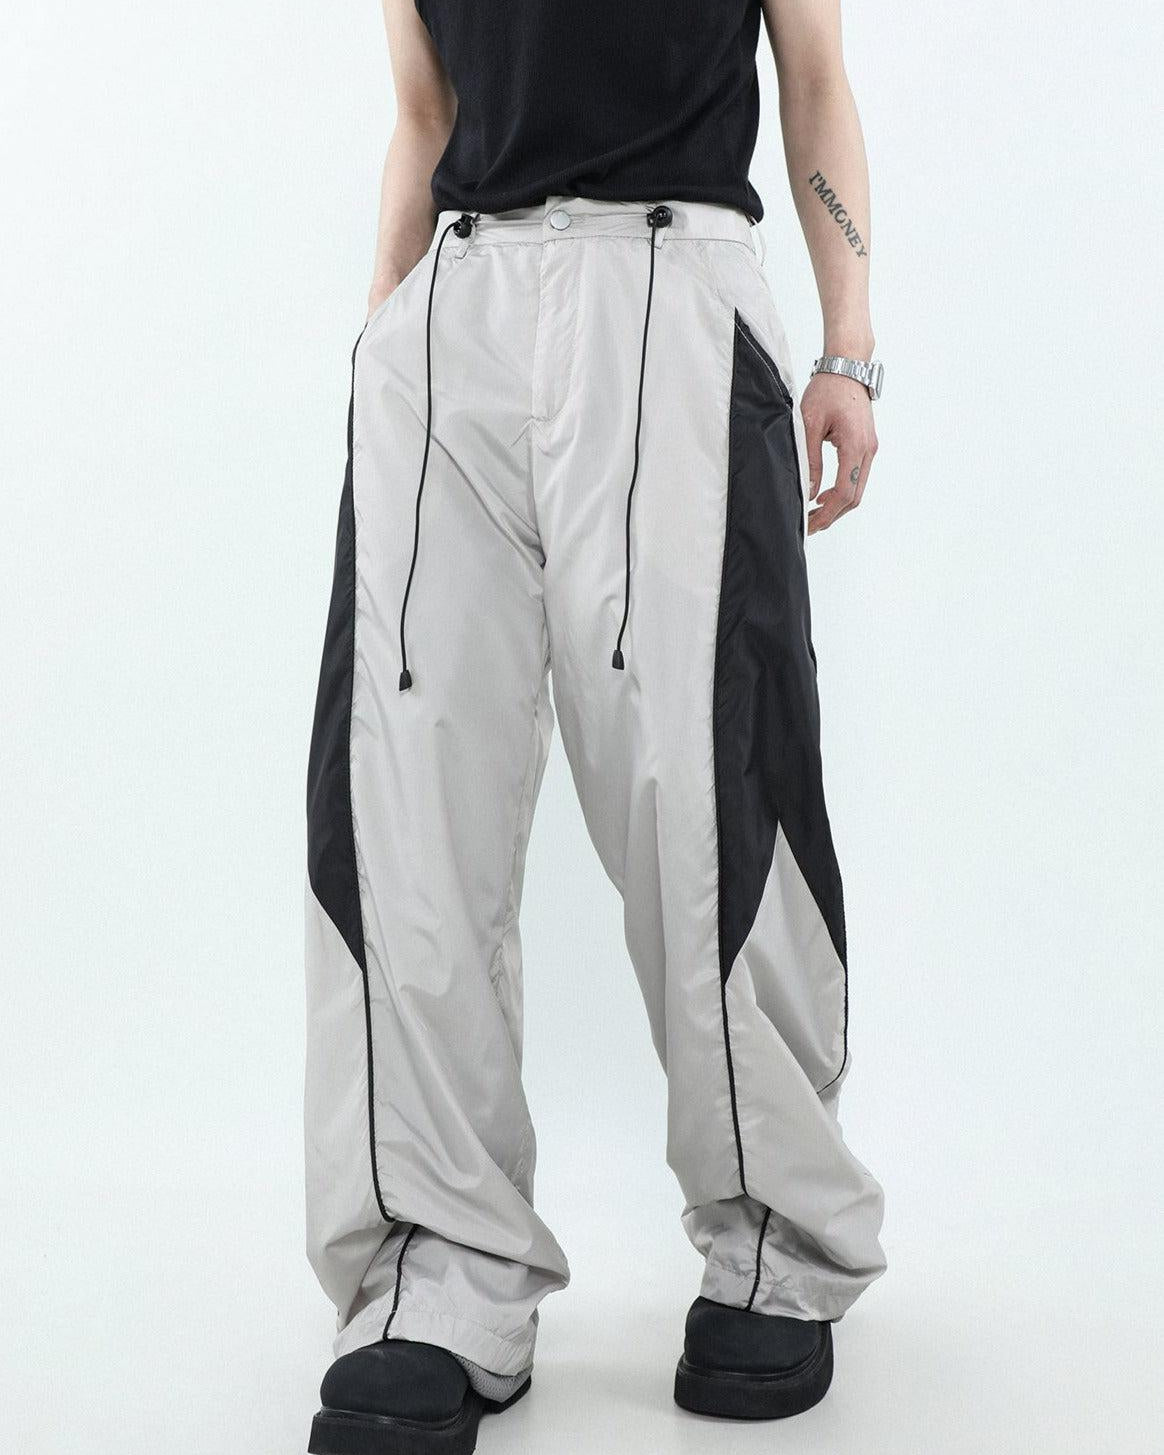 Mr Nearly Contrast Side Seam Sports Pants Korean Street Fashion Pants By Mr Nearly Shop Online at OH Vault